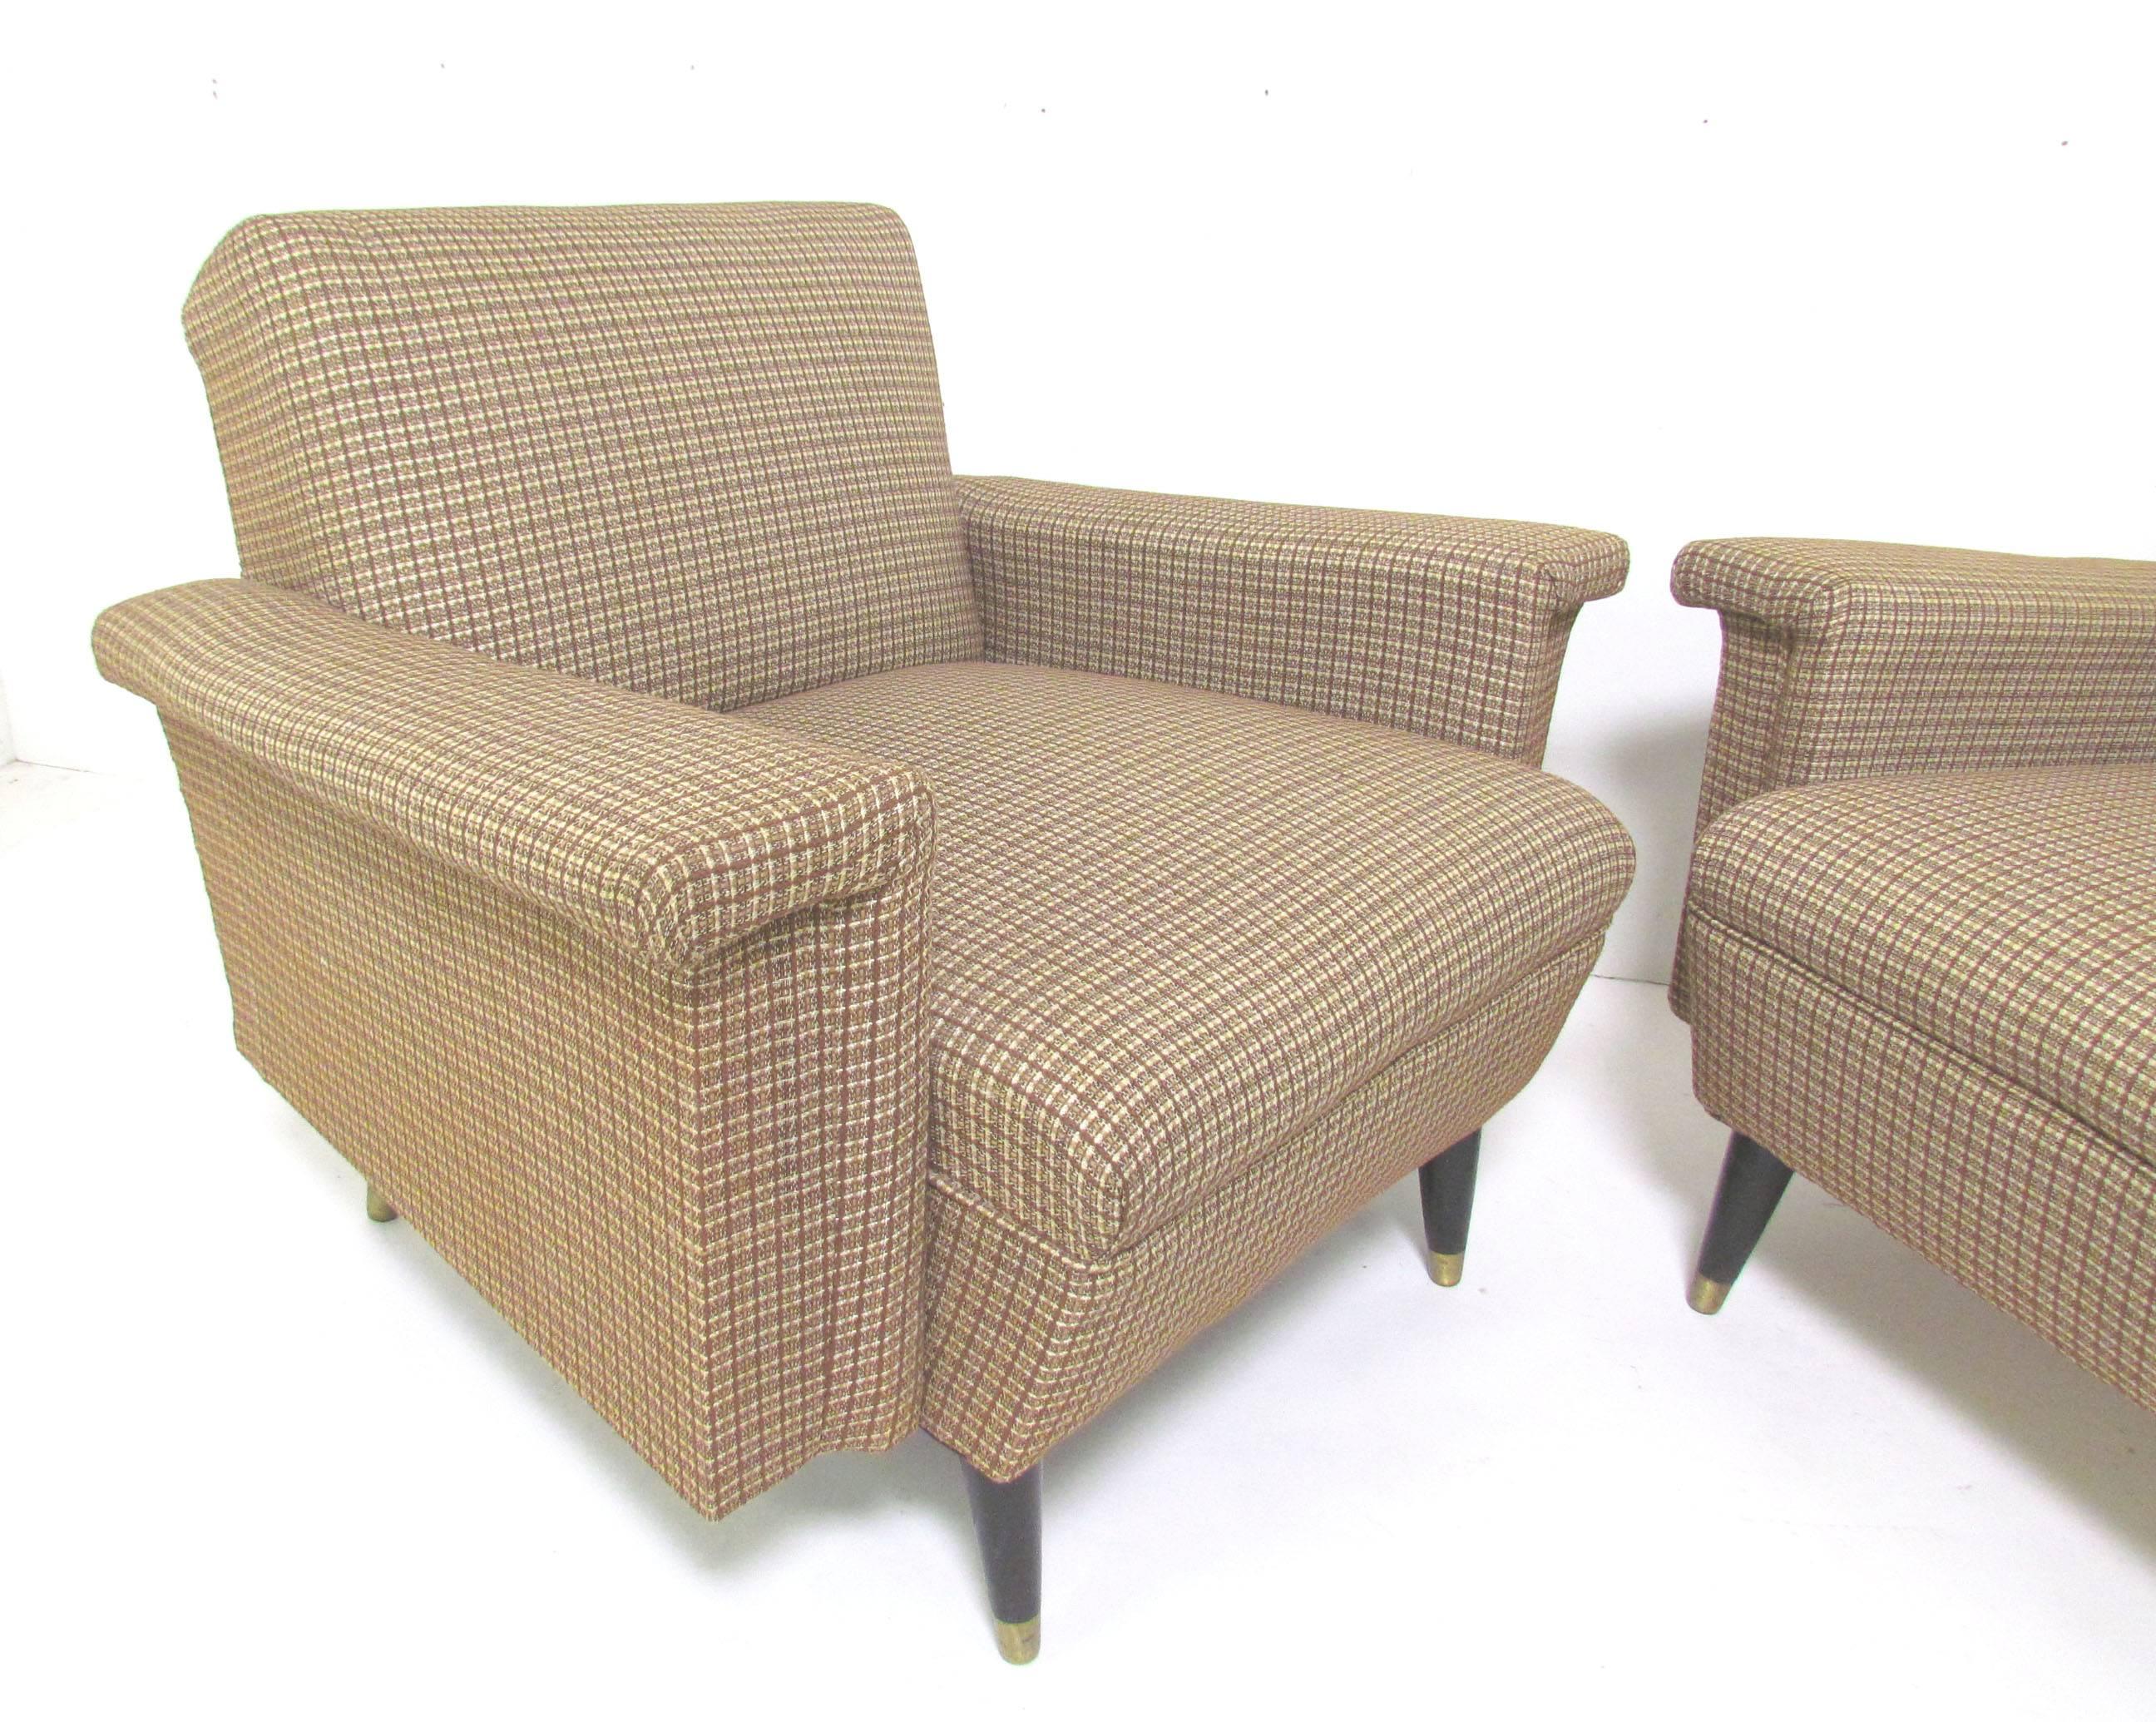 Pair of mid-century modern club lounge chairs with unusual upholstered boxed paddle arms, circa 1960s, with  gently splayed legs of ebonized wood with brass sabots.  These chairs echo the uniquely American avionic style of the late 1950s and early